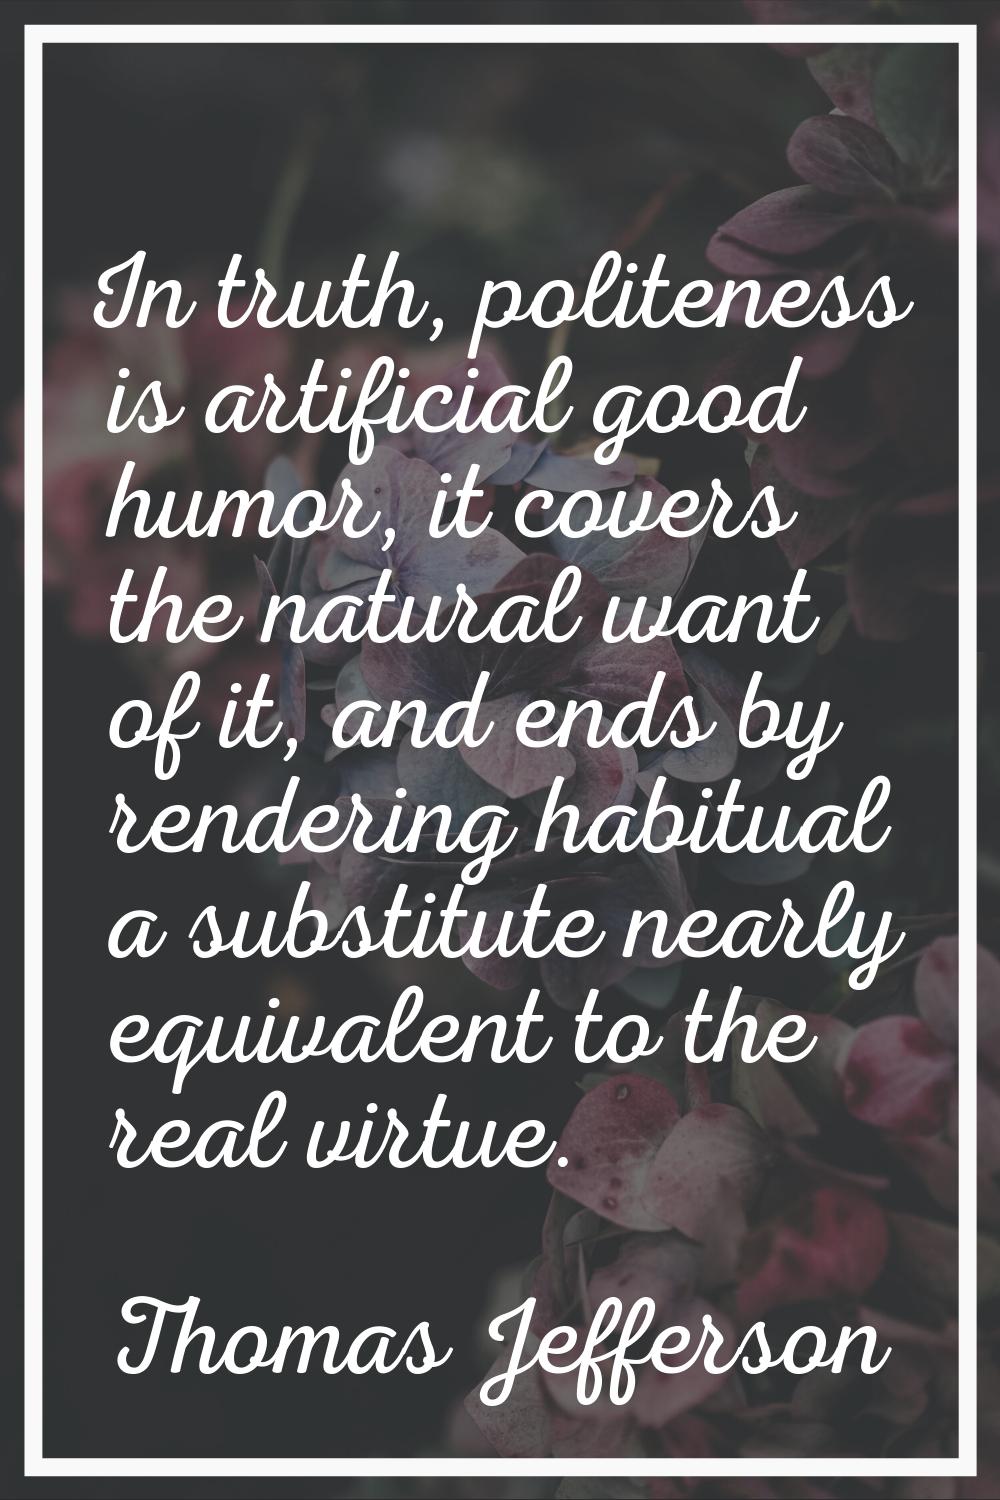 In truth, politeness is artificial good humor, it covers the natural want of it, and ends by render